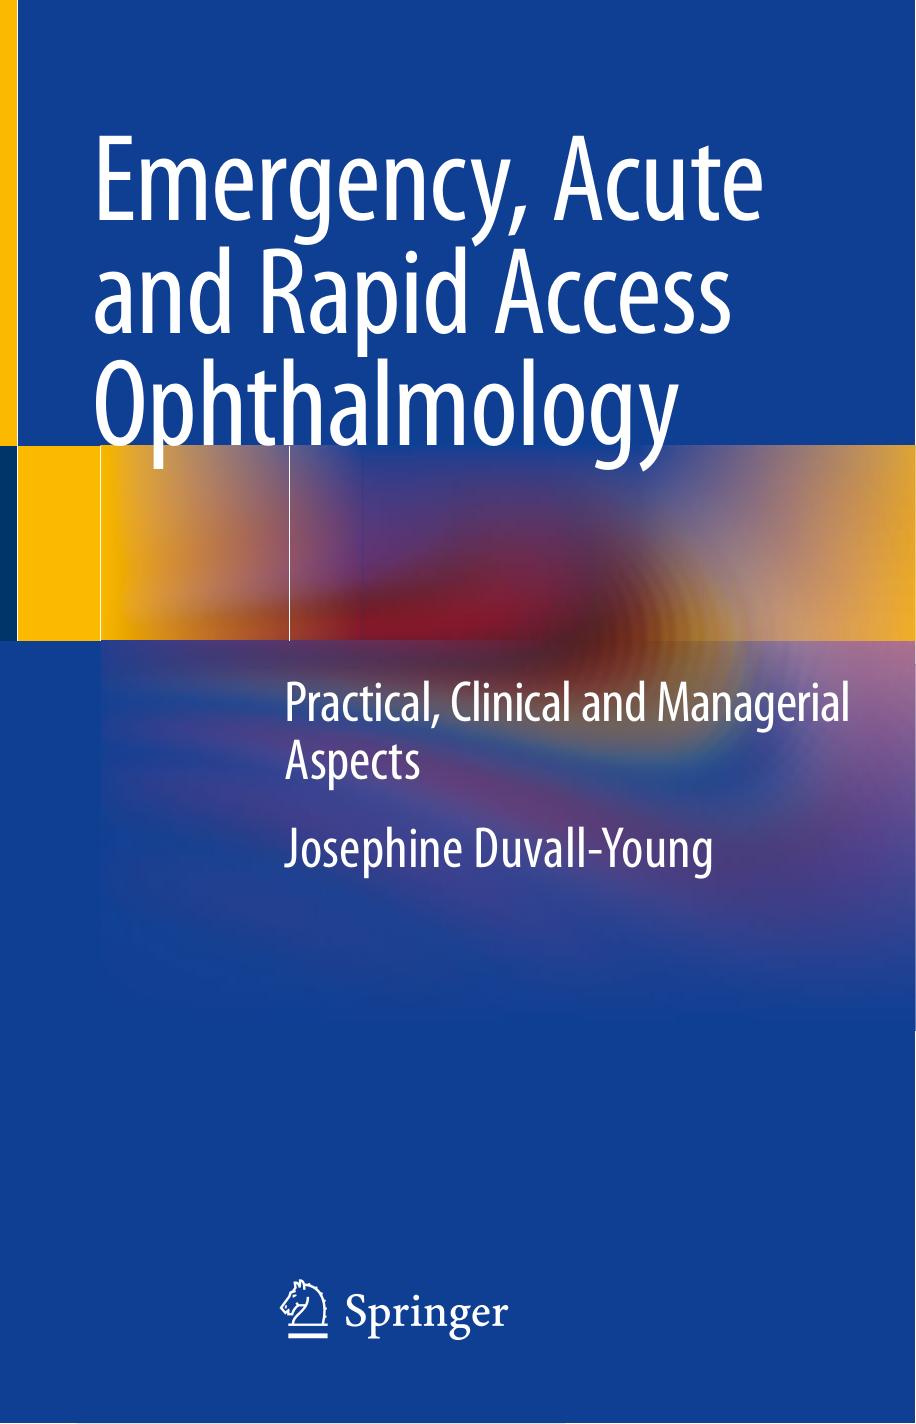 Emergency, Acute and Rapid Access Ophthalmology  Practical, Clinical and Managerial Aspects 2019